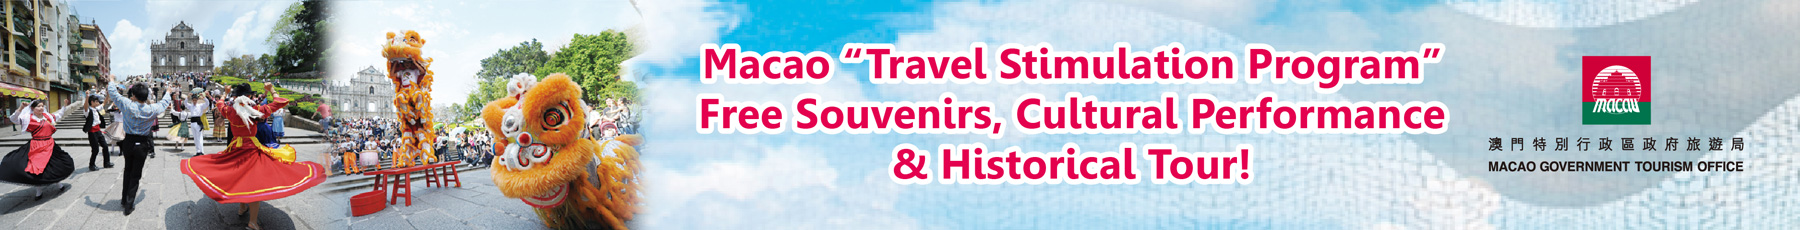 Banner Ad of 澳門特別行政區政府旅遊局 MACAO GOVERNMENT TOURISM OFFICE